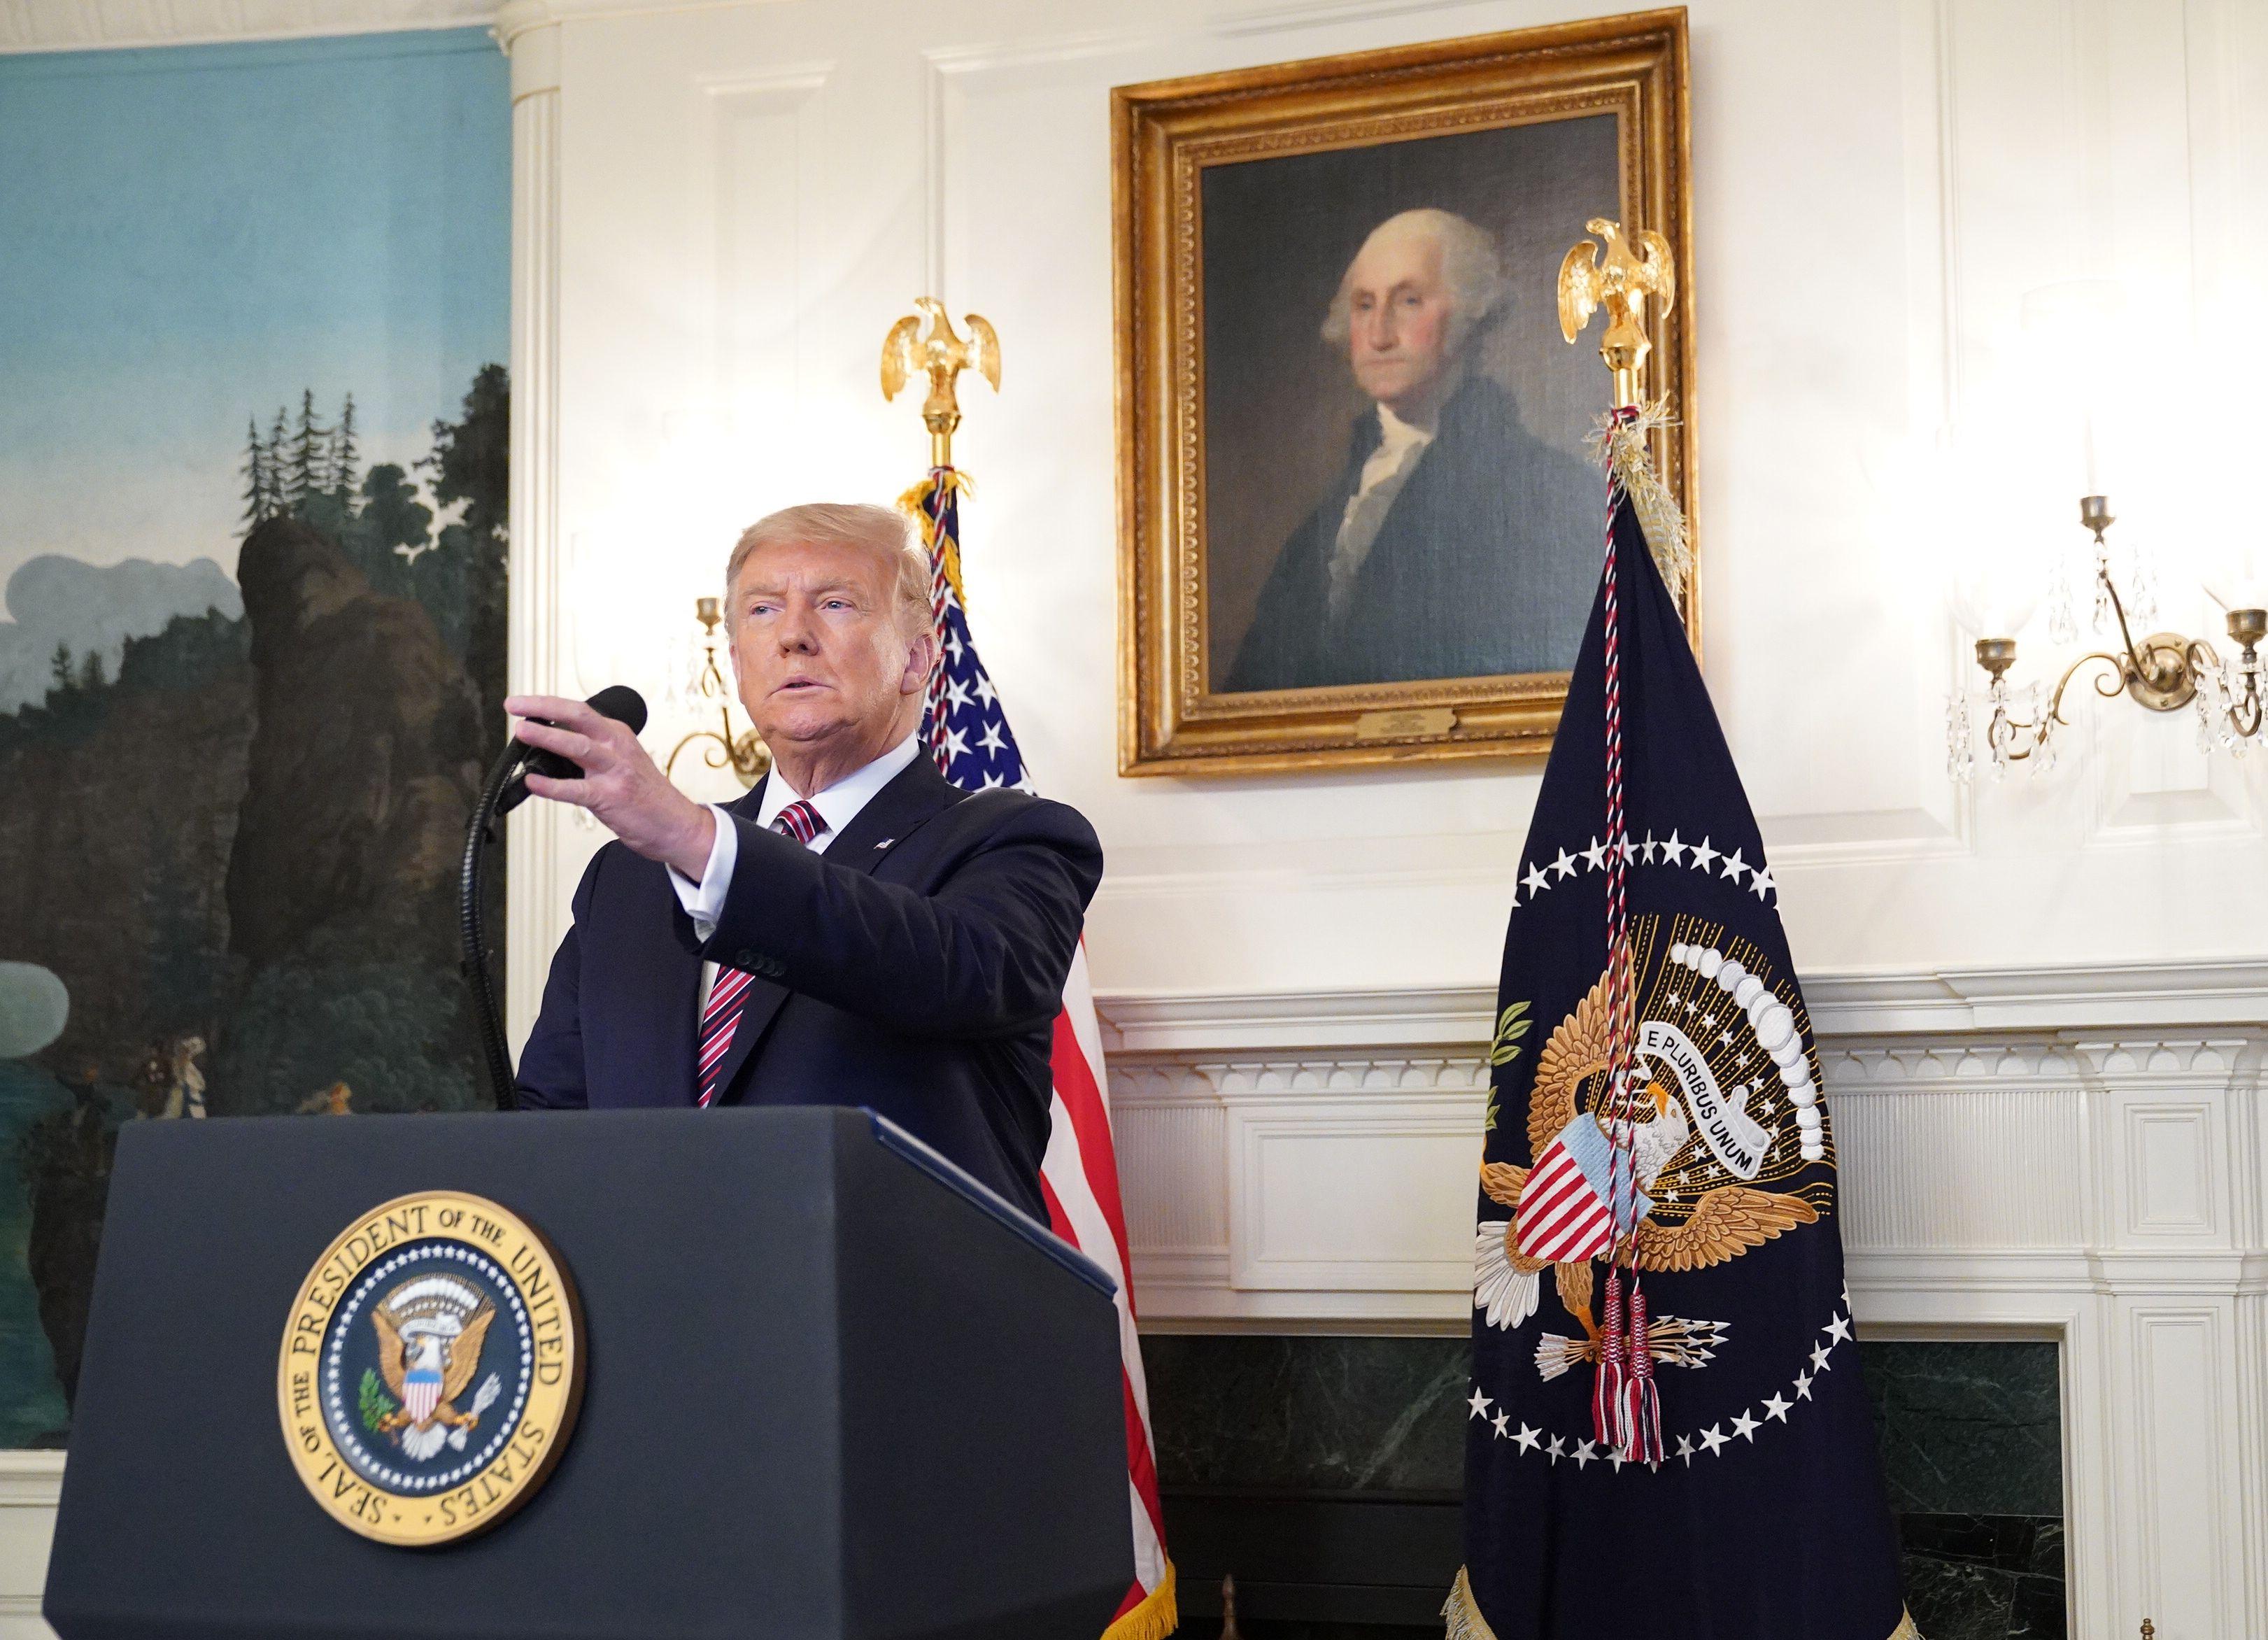 US President Donald Trump arrives to speak on judicial appointments in the Diplomatic Reception Room of the White House in Washington, DC on September 9, 2020. (Photo by MANDEL NGAN / AFP)